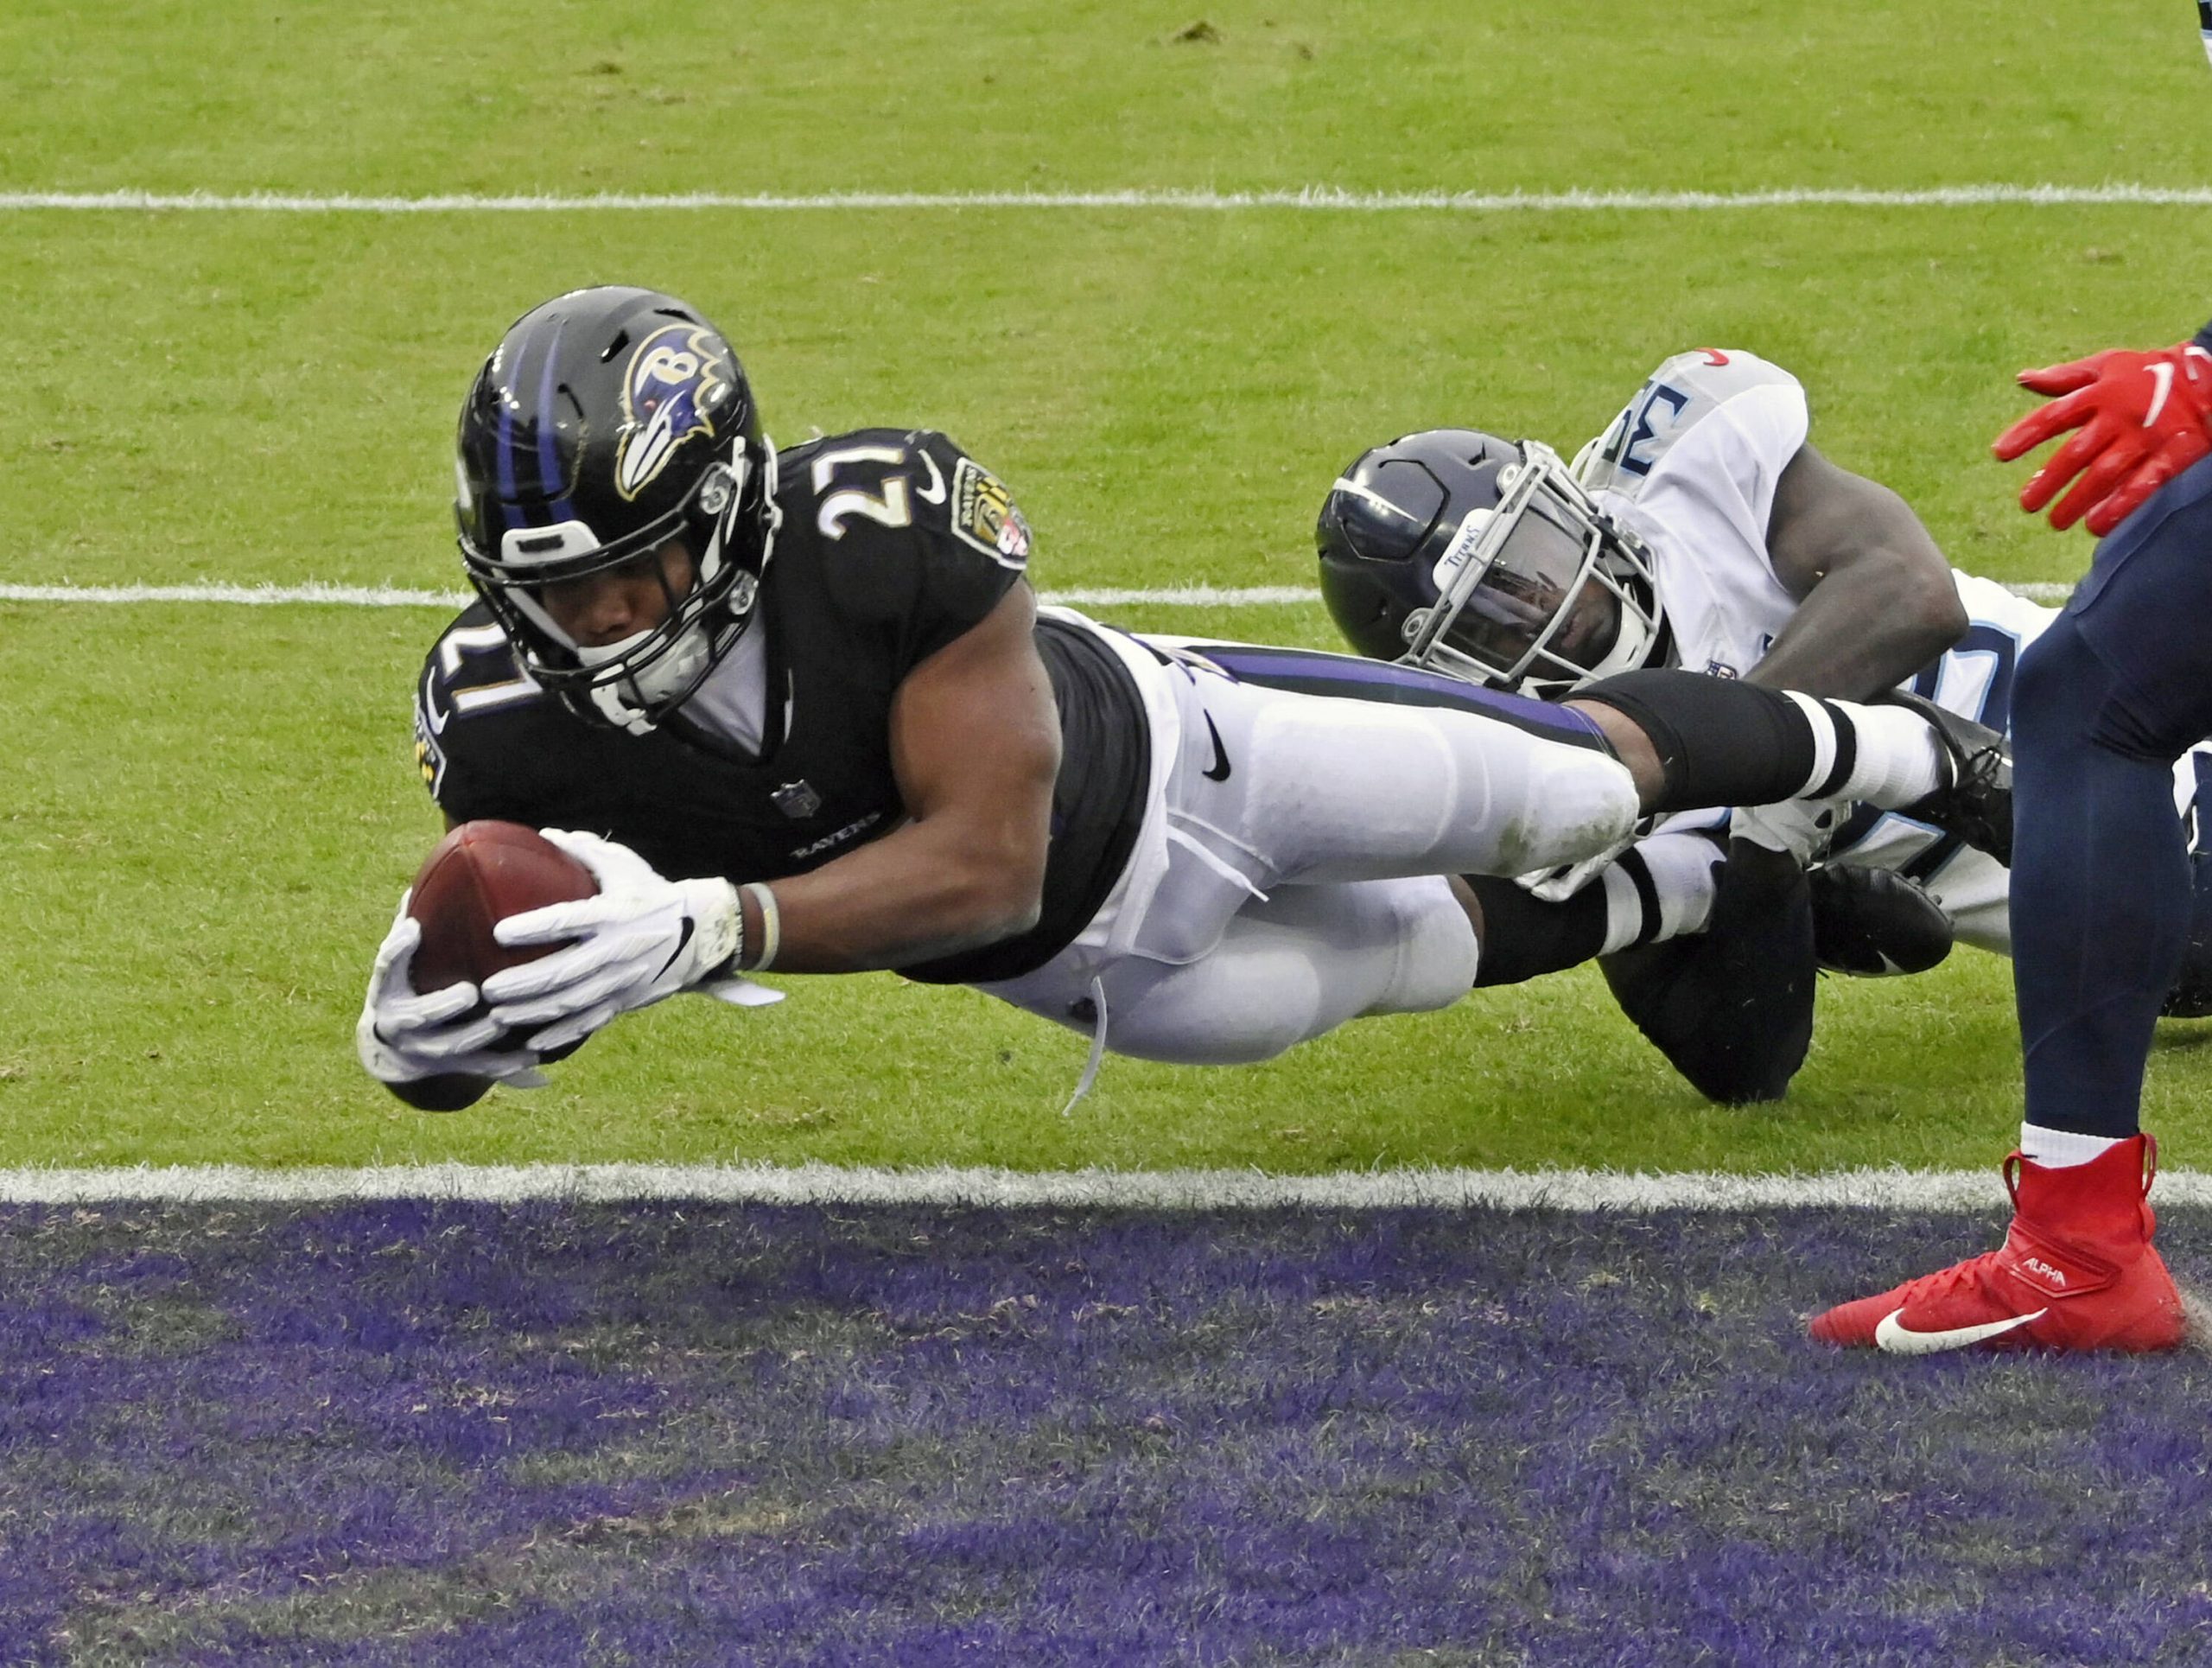 November 22, 2020, Baltimore, MD, USA: Baltimore Ravens J.K. Dobbins 27 dives for the end zone on a two-point conversion against the Tennessee Titans Breon Borders in the second quarter on Sunday, Nov. 22, 2020 at M&T Bank Stadium in Baltimore, Maryland. Baltimore USA - ZUMAm67_ 20201122_zaf_m67_002 Copyright: xKennethxK.xLamx